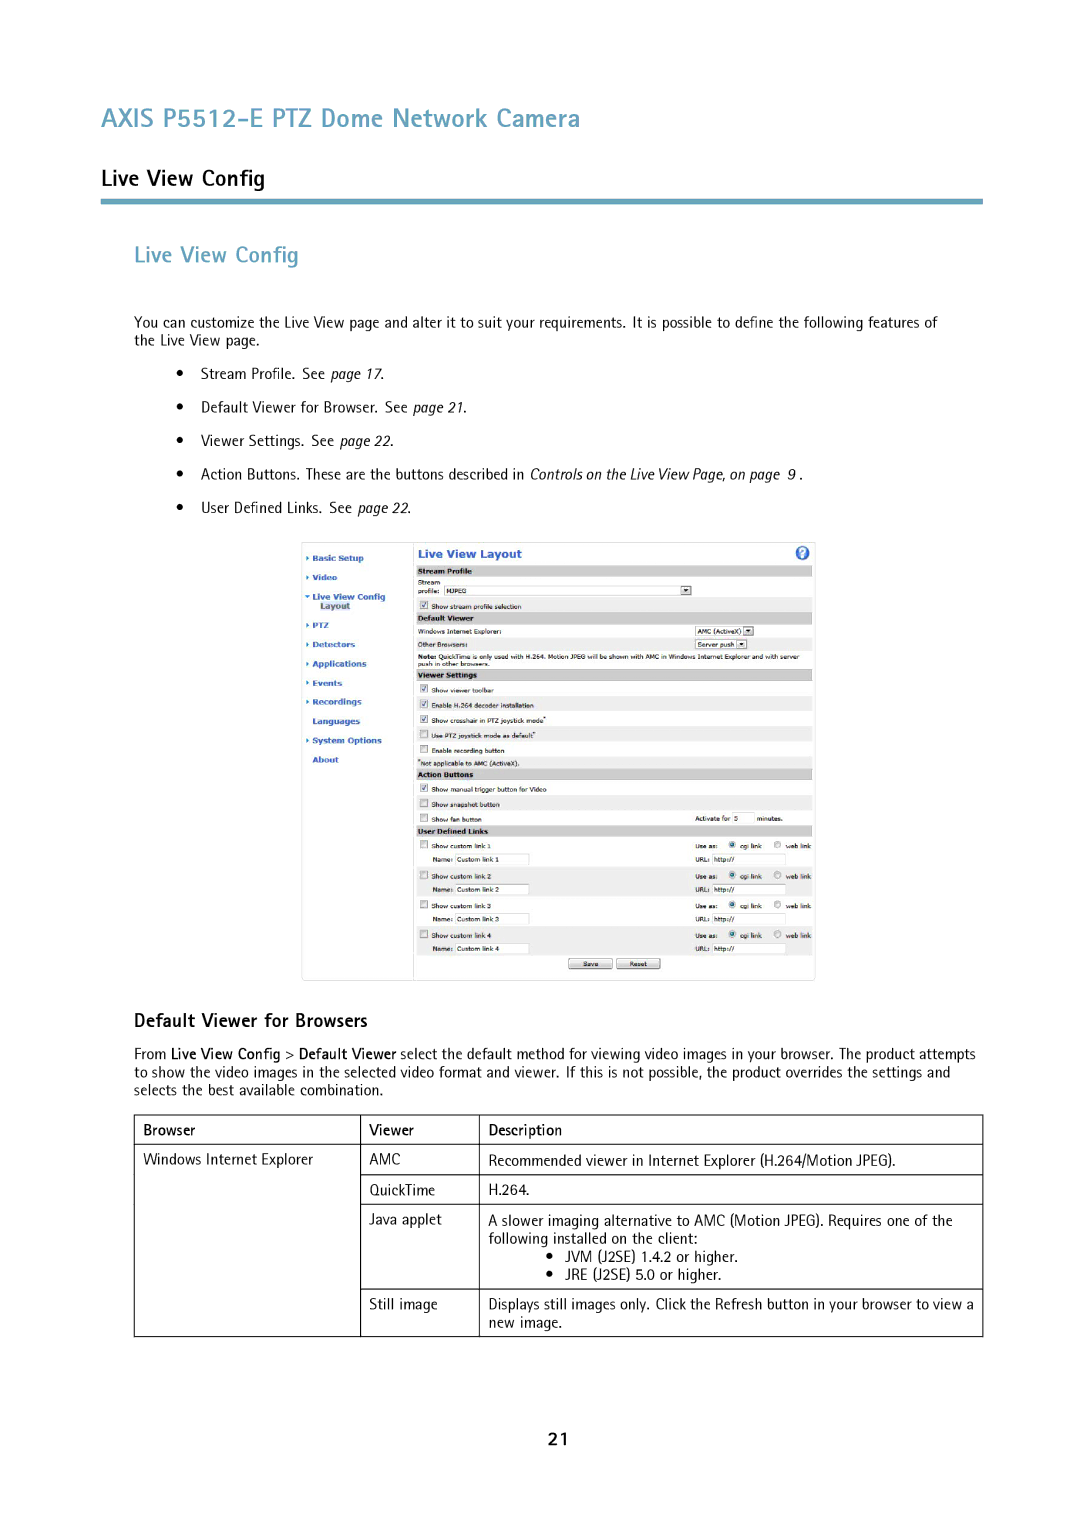 Axis Communications P5512 user manual Live View Config, Default Viewer for Browsers, Browser Viewer Description 